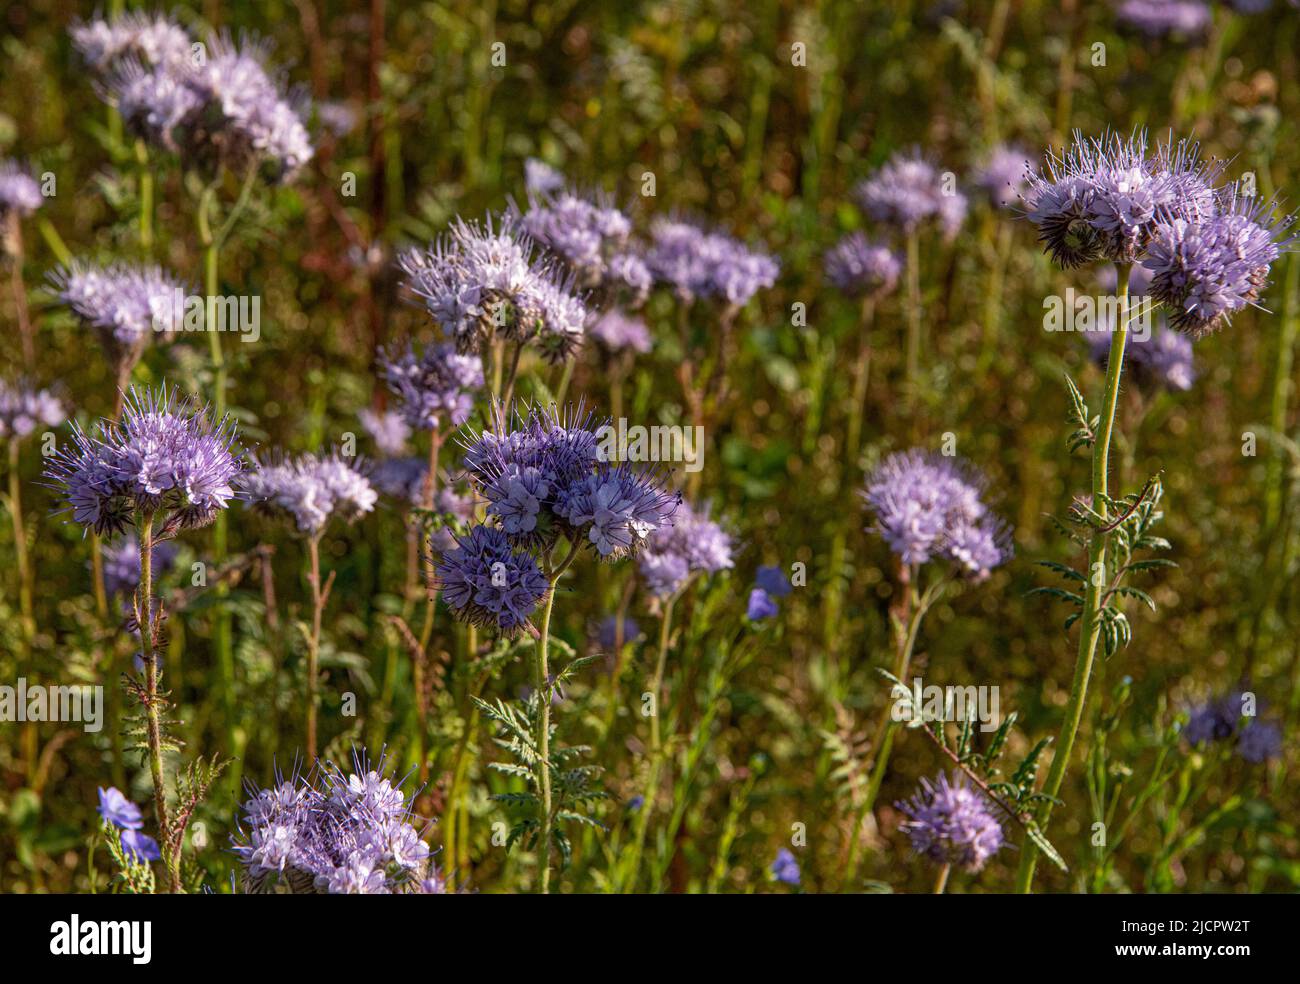 Cornwall, UK, 15/06/2022, Cornish fields growing Phacelia, listed as one of the top 20 honey-producing flowers for honeybees Credit: kathleen white/Alamy Live News Stock Photo